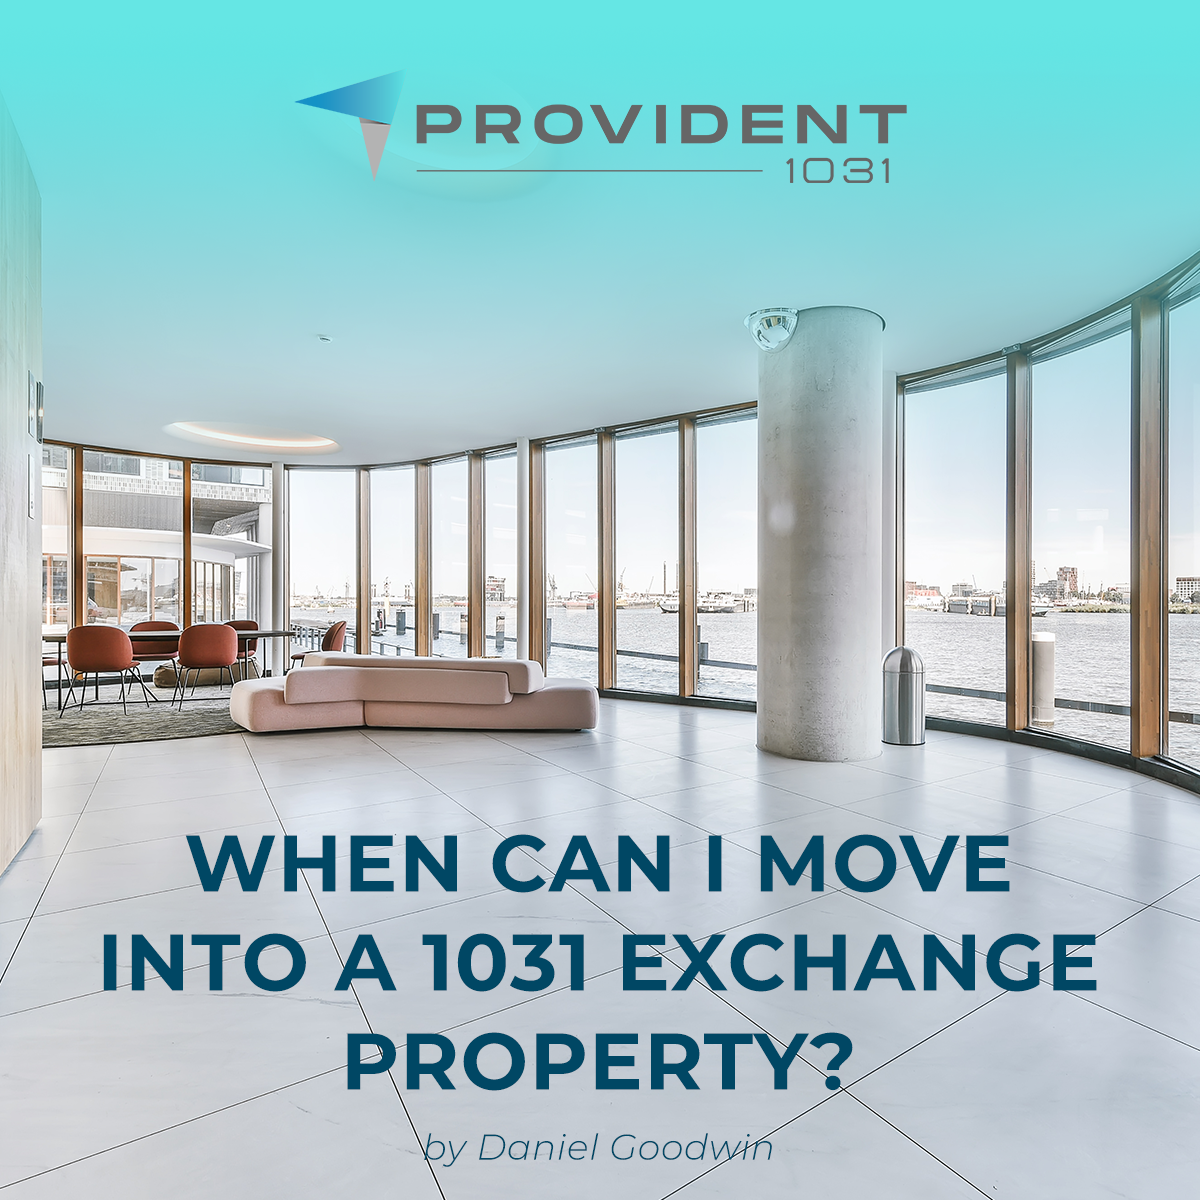 When Can I Move Into A 1031 Exchange? - Provident 1031